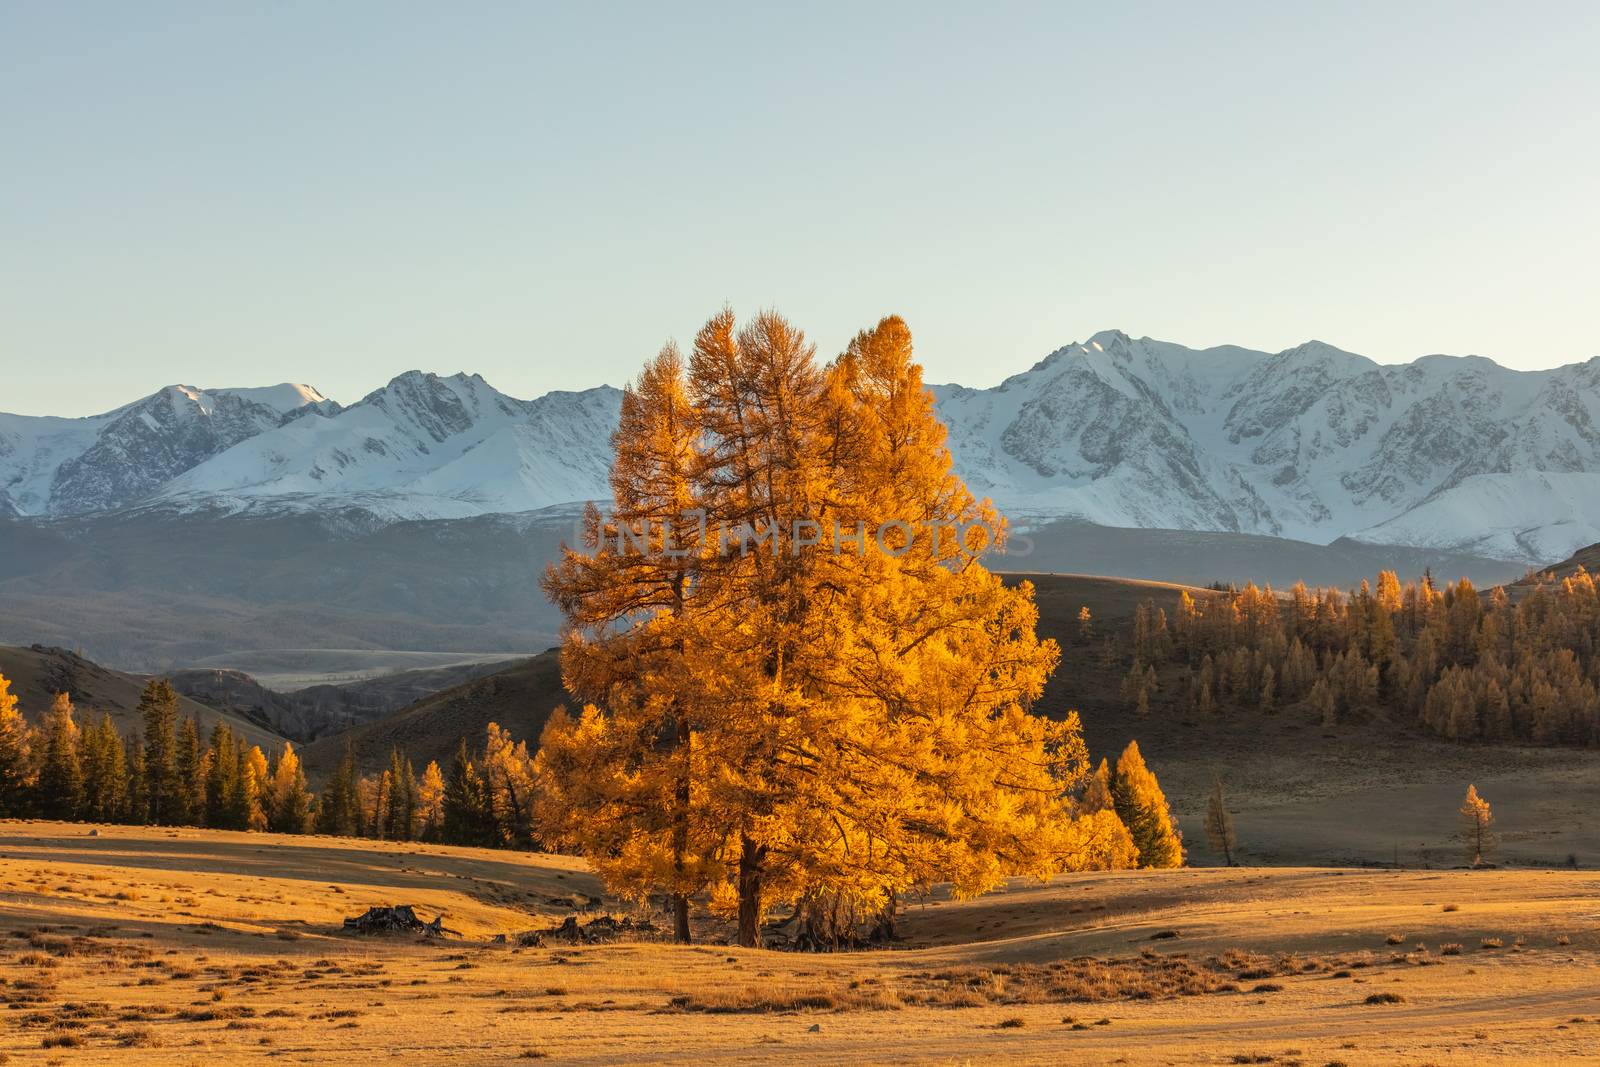 Beautiful shot of a valley full of golden trees and white snowy mountains in the background and a lone tree in the foreground. Fall time. Sunset. Altai mountains, Russia. Golden hour by DamantisZ